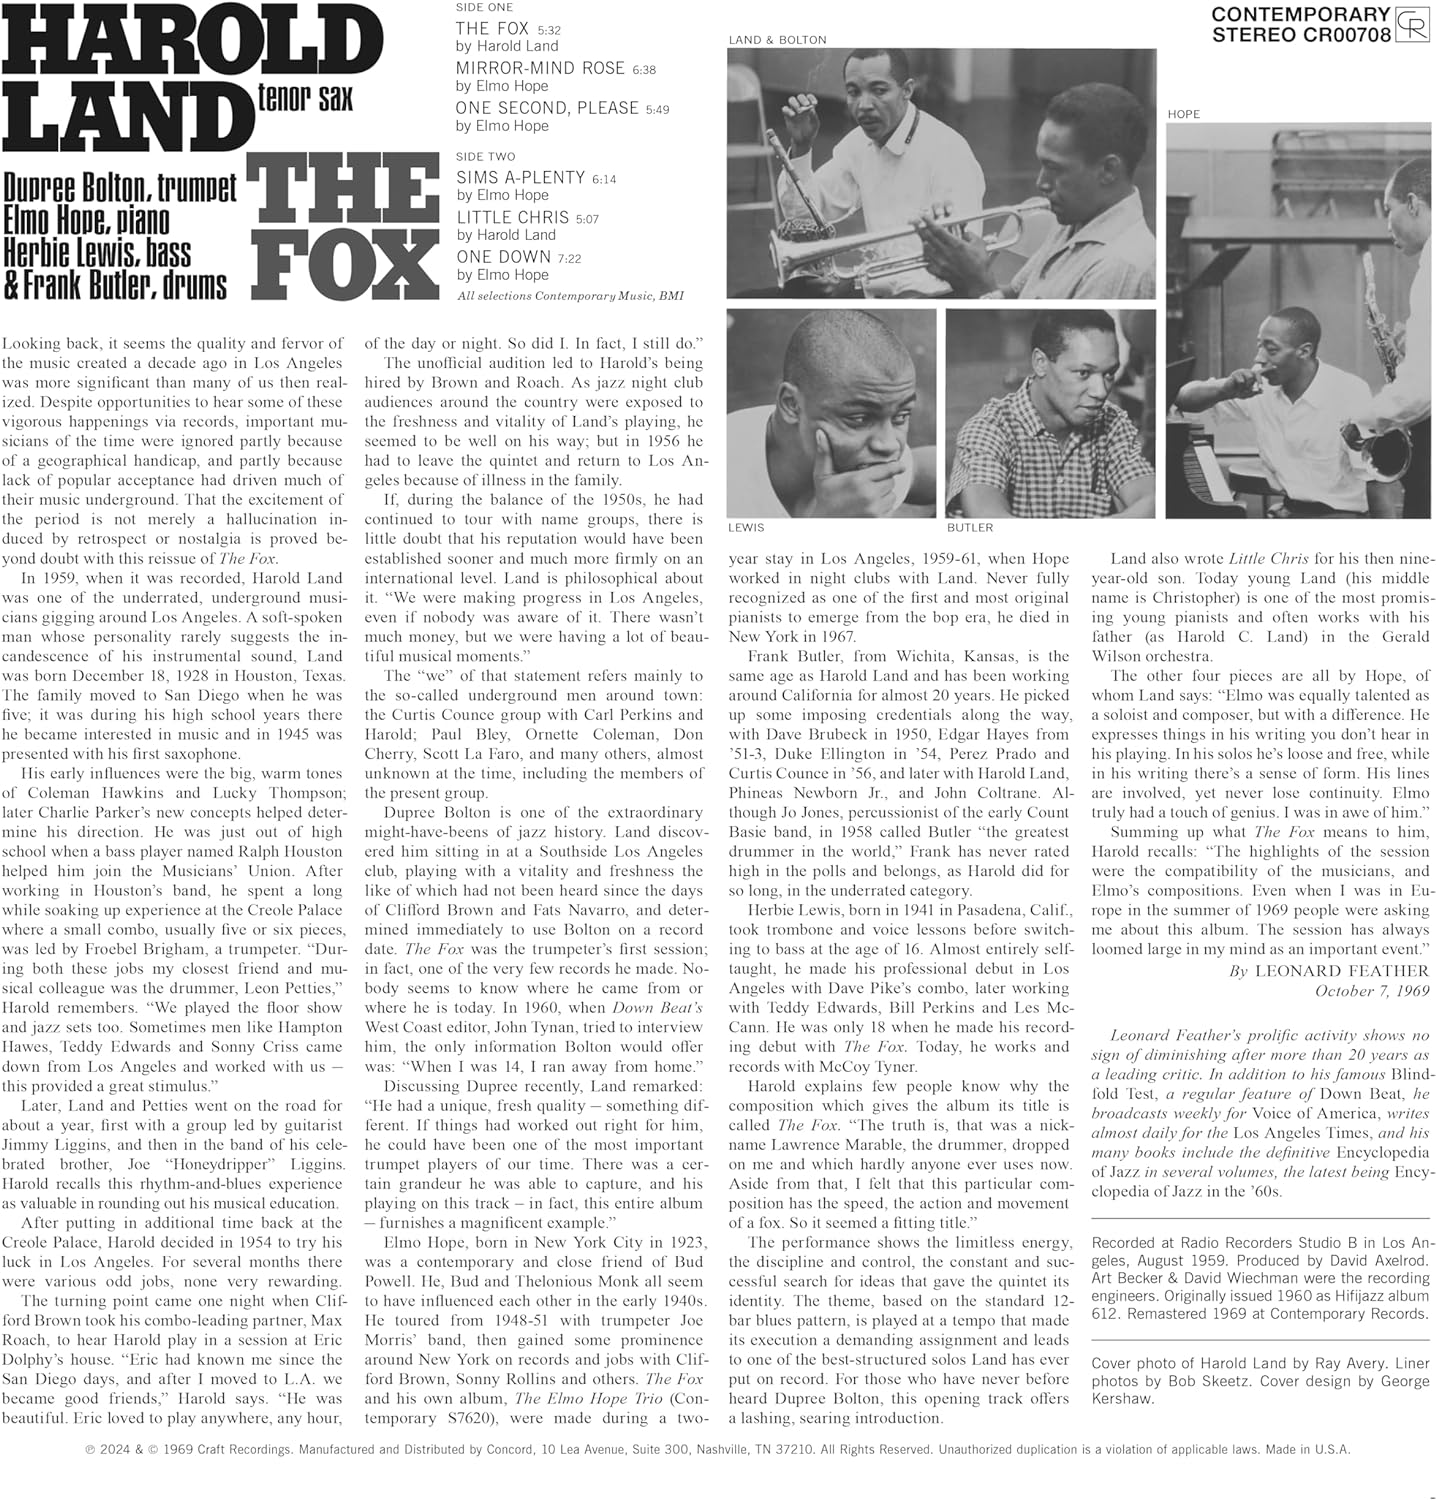 Land, Harold/The Fox (Contemporary Records Acoustic Sounds Series) [LP]